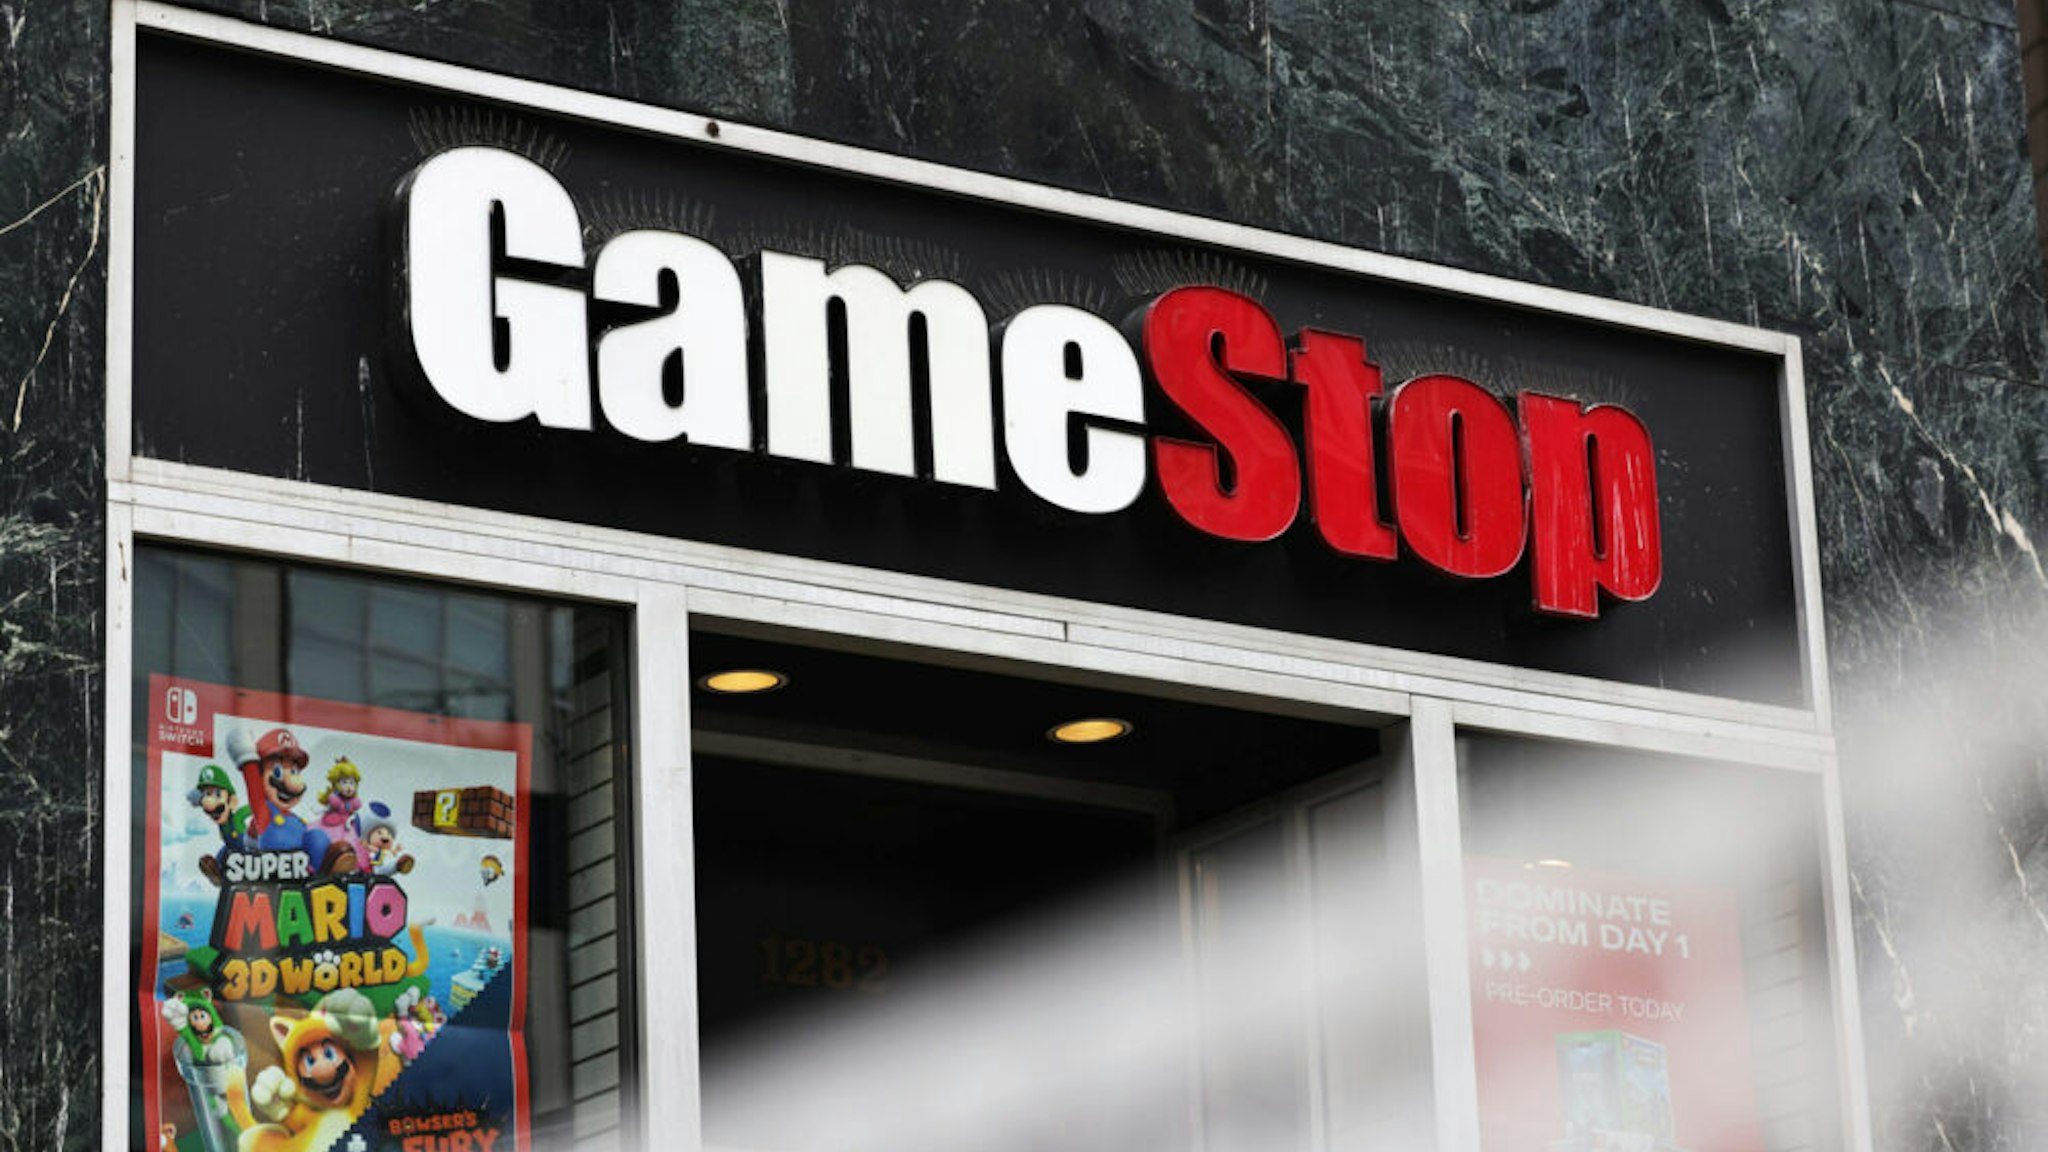 NEW YORK, NEW YORK - JANUARY 27: GameStop store signage is seen on January 27, 2021 in New York City. Stock shares of videogame retailer GameStop Corp has increased 700% in the past two weeks due to amateur investors.